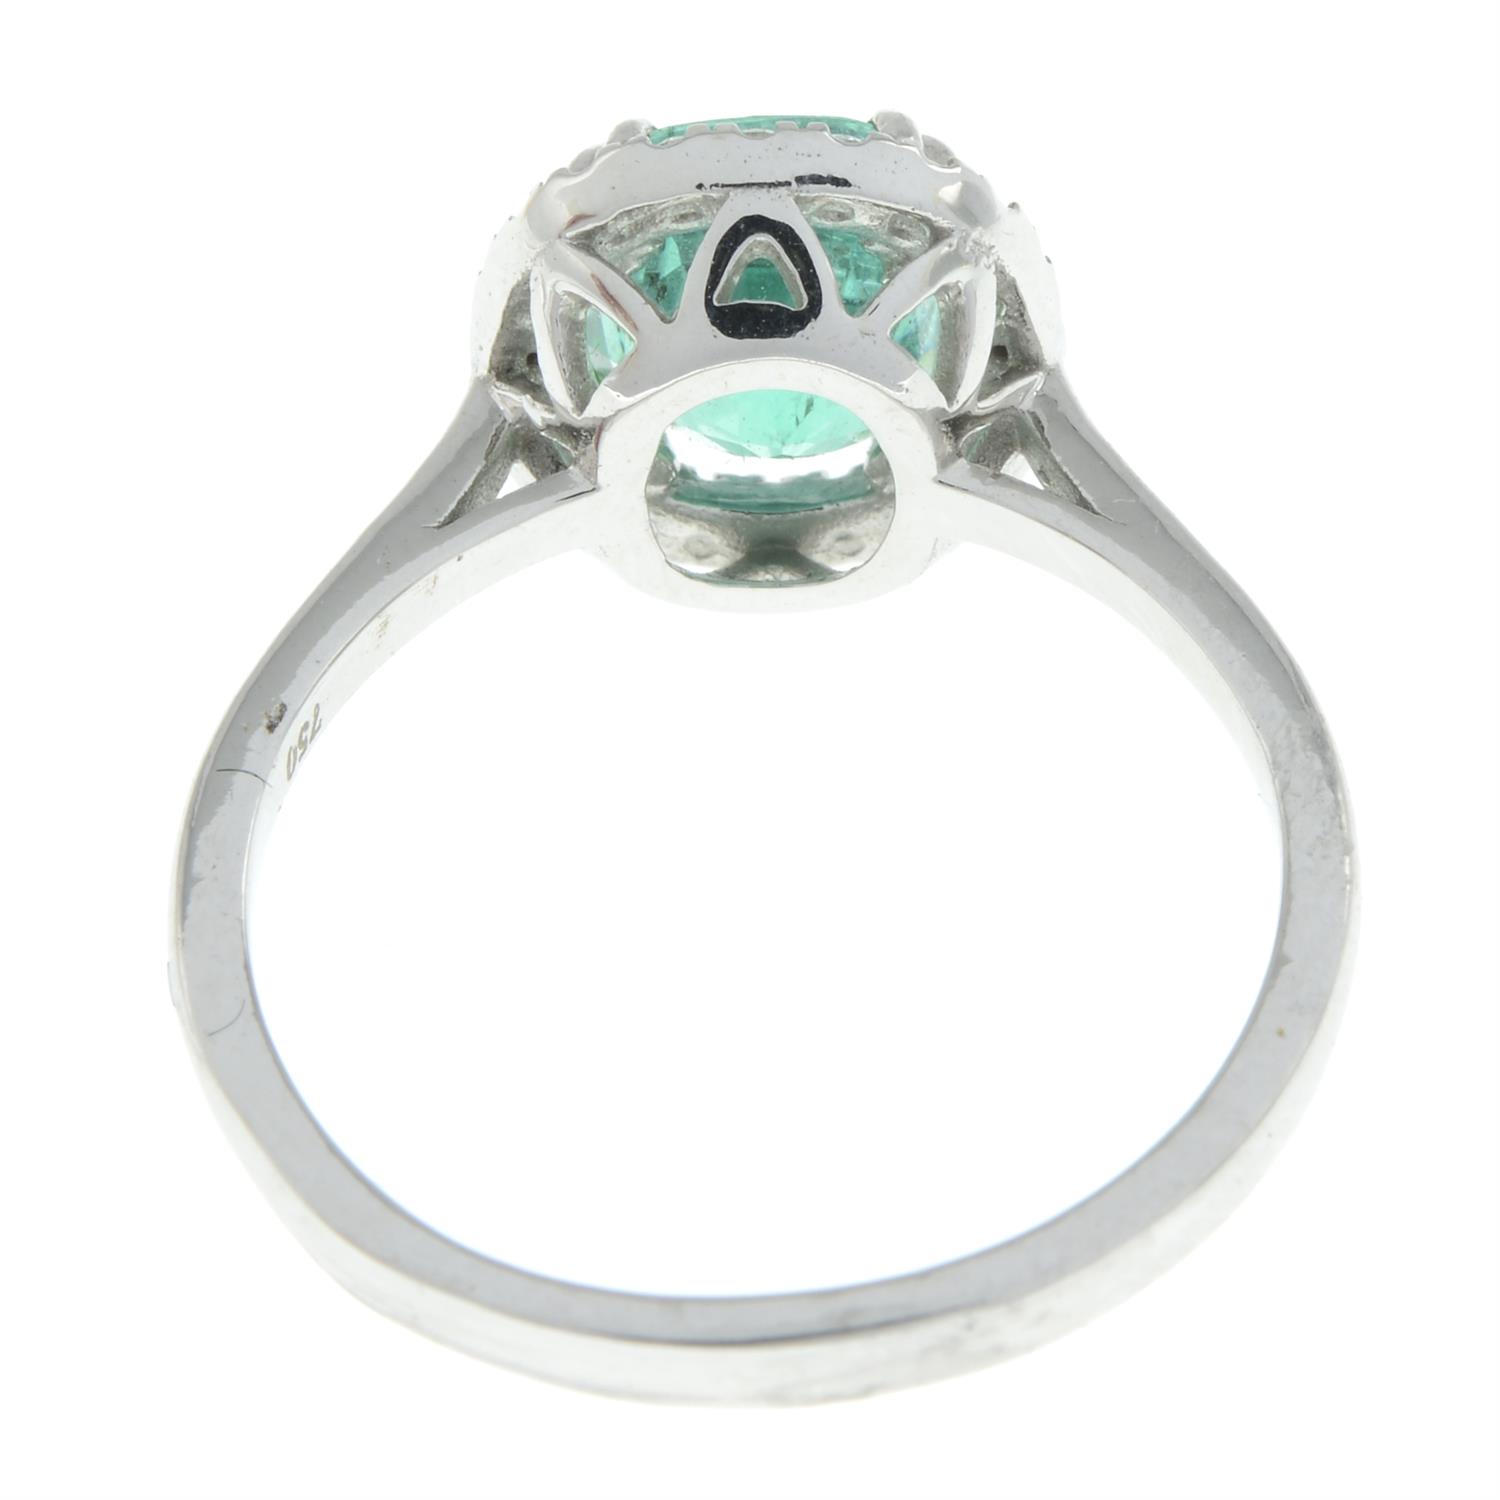 Emerald and diamond cluster ring - Image 3 of 5